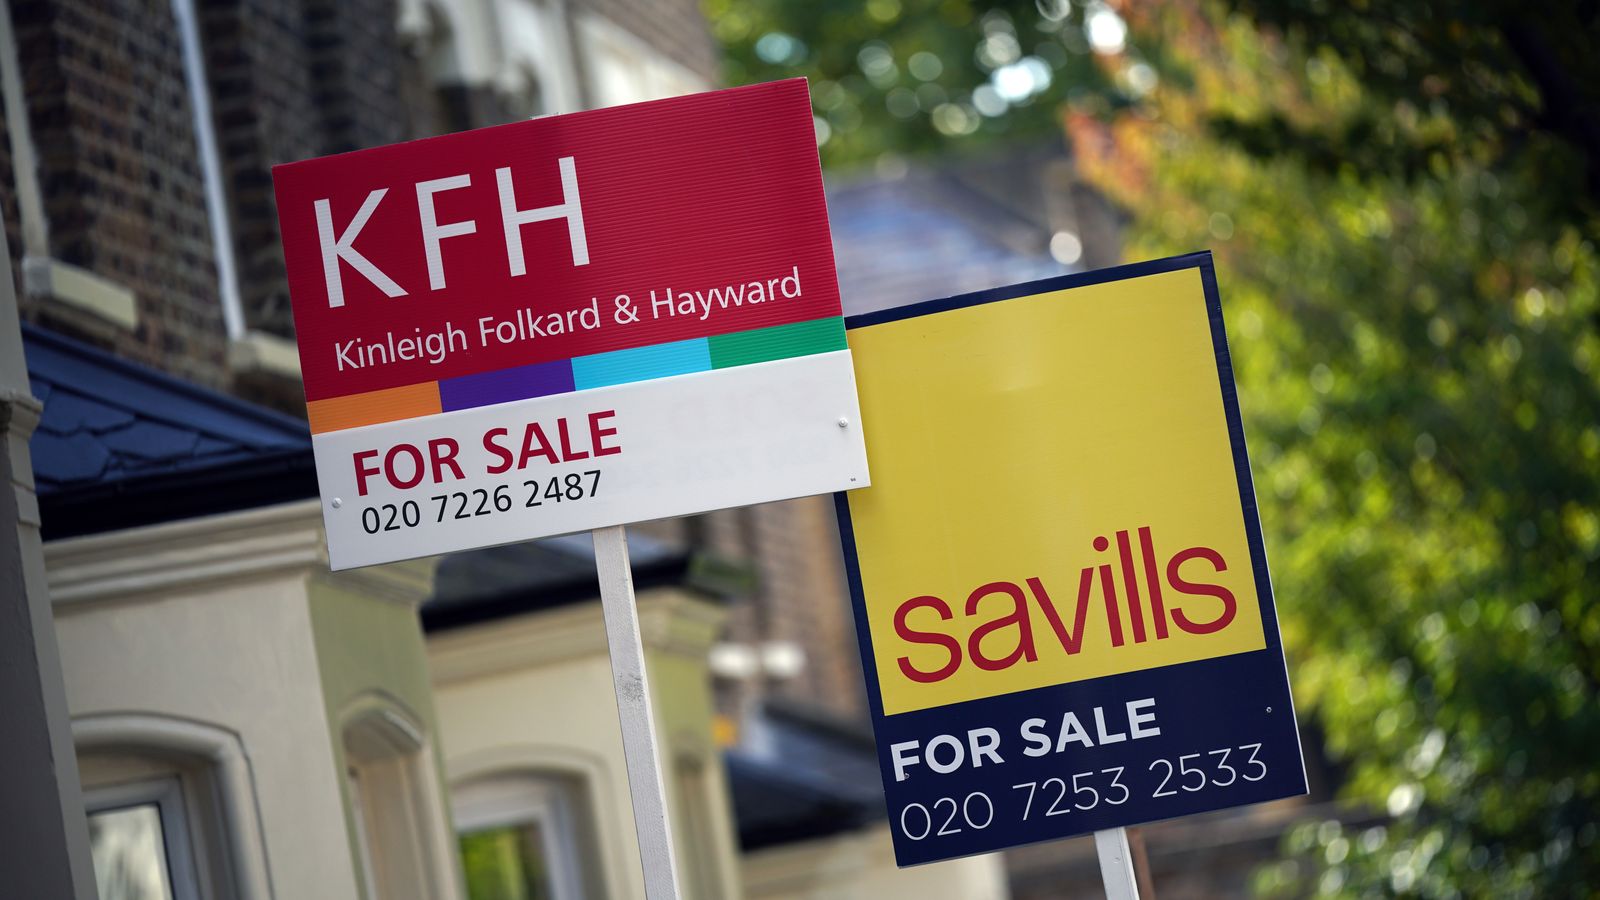 House prices creep up as market shows 'resilience'